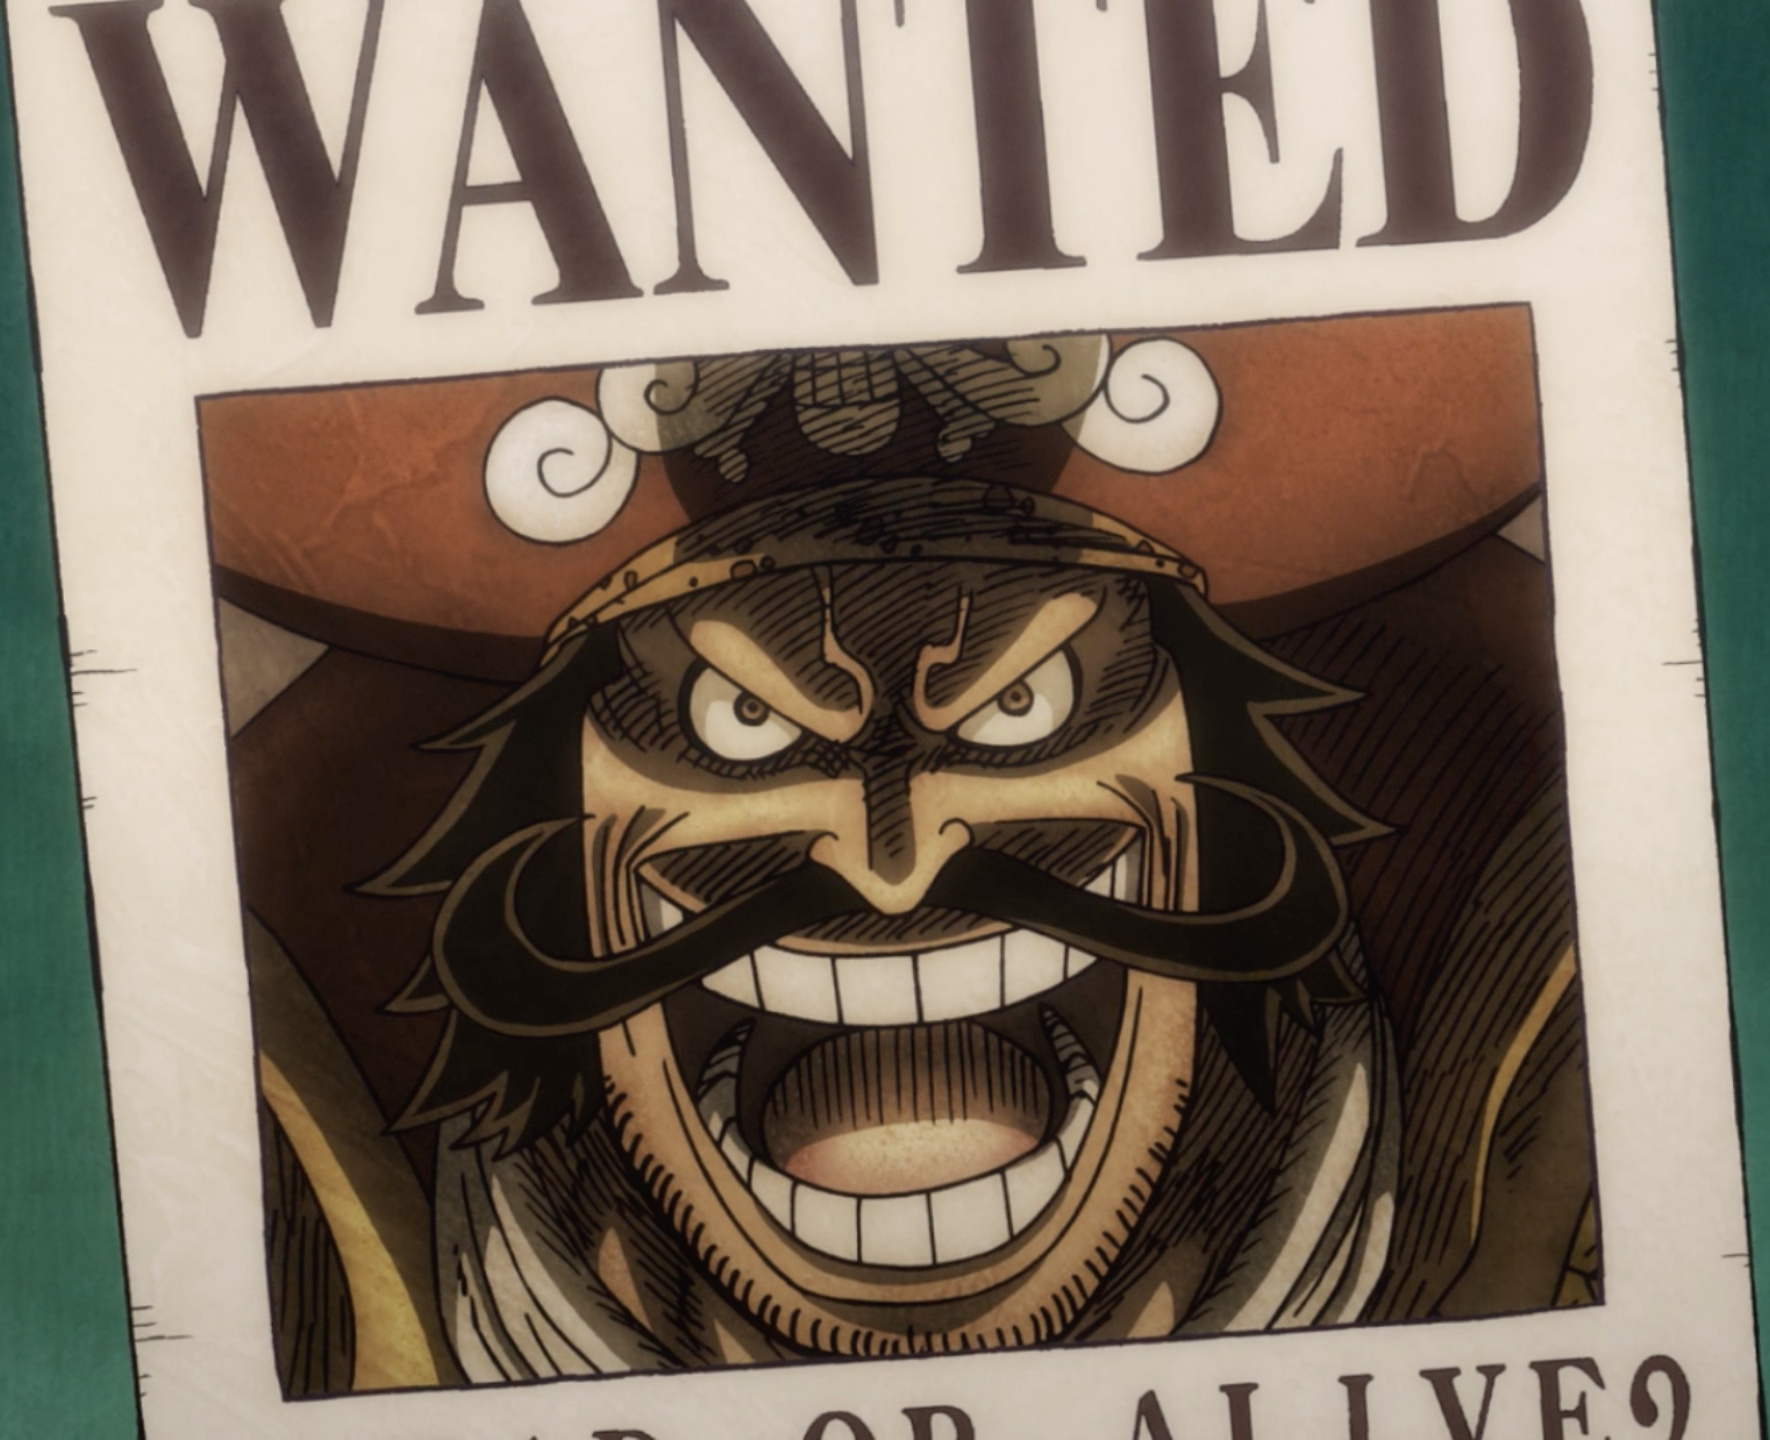 One Piece Confirms a Big Fan-Theory About Gold Roger